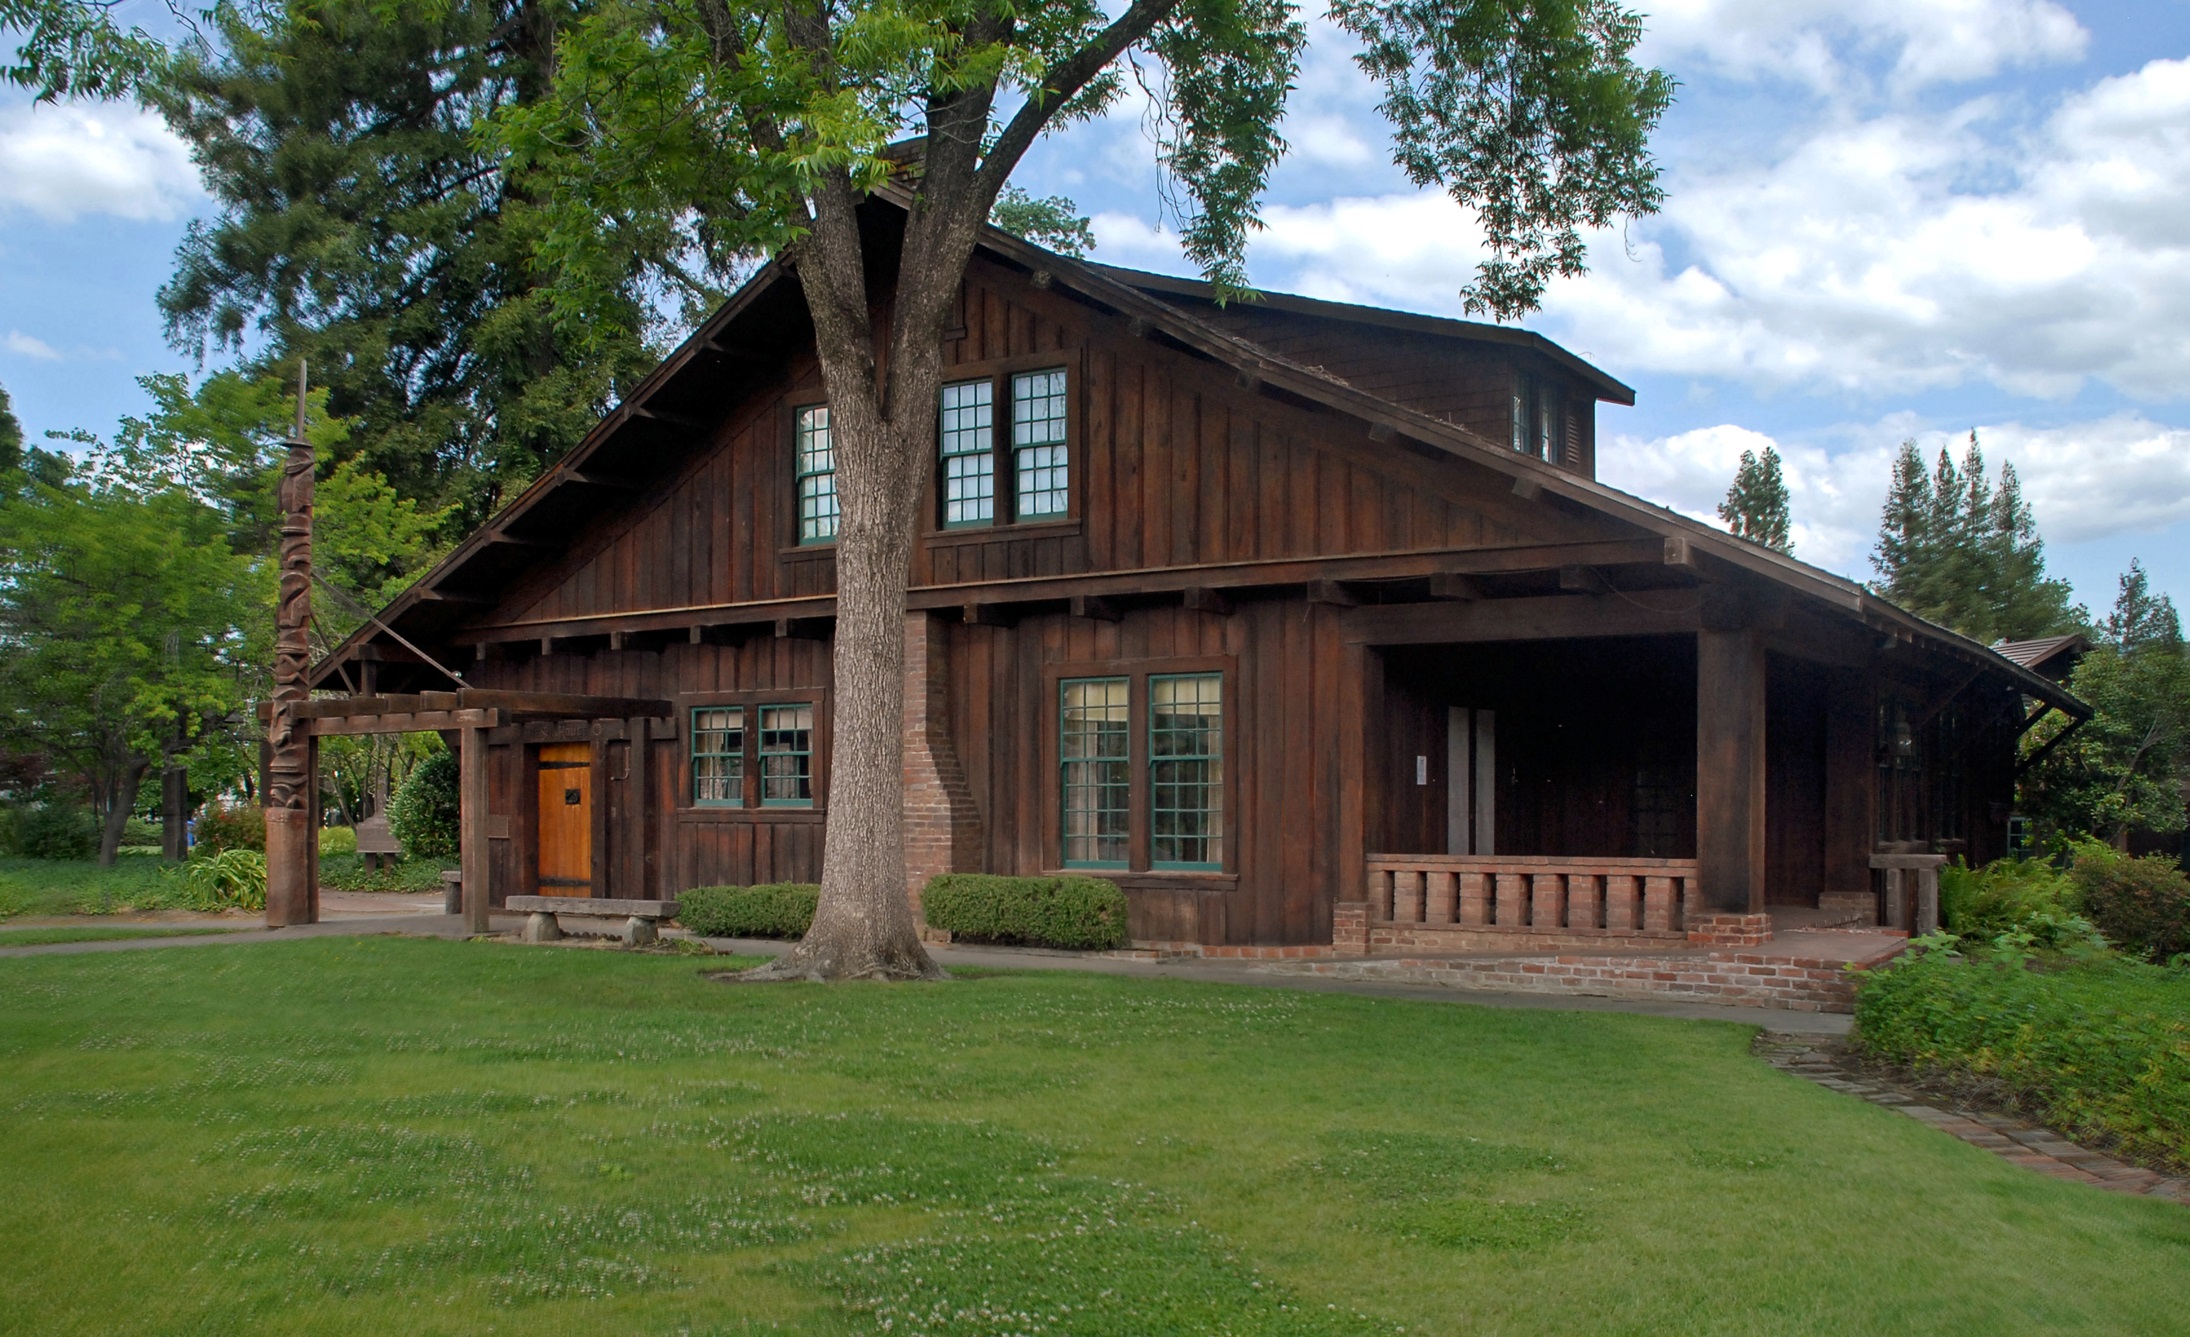 The Sun House, a 1911 redwood Craftsman bungalow, is adjacent to the Grace Hudson Museum in Ukiah. It is both a California Historical Landmark and listed on the National Register of Historic Places.